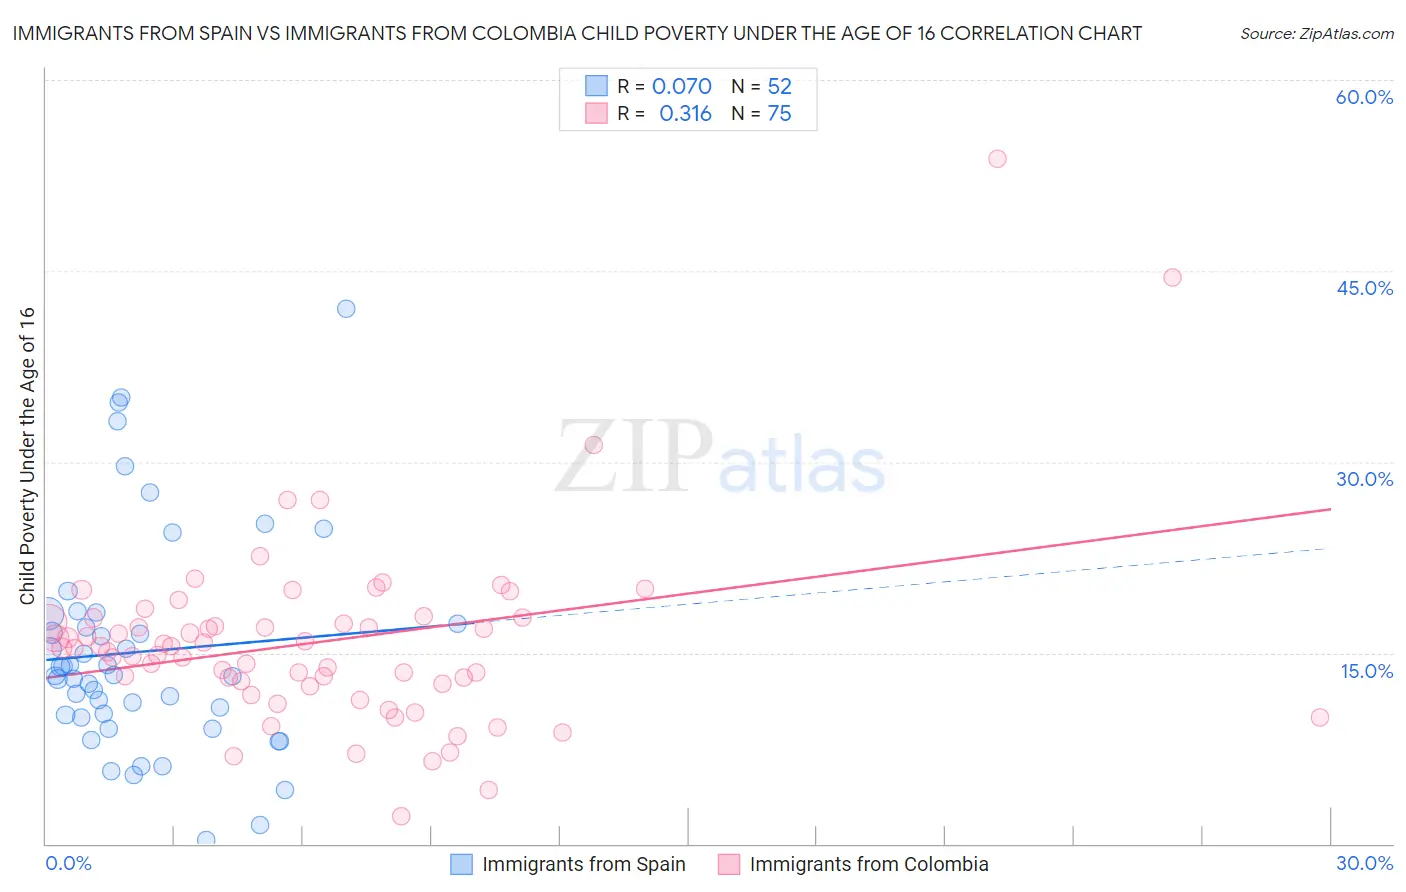 Immigrants from Spain vs Immigrants from Colombia Child Poverty Under the Age of 16